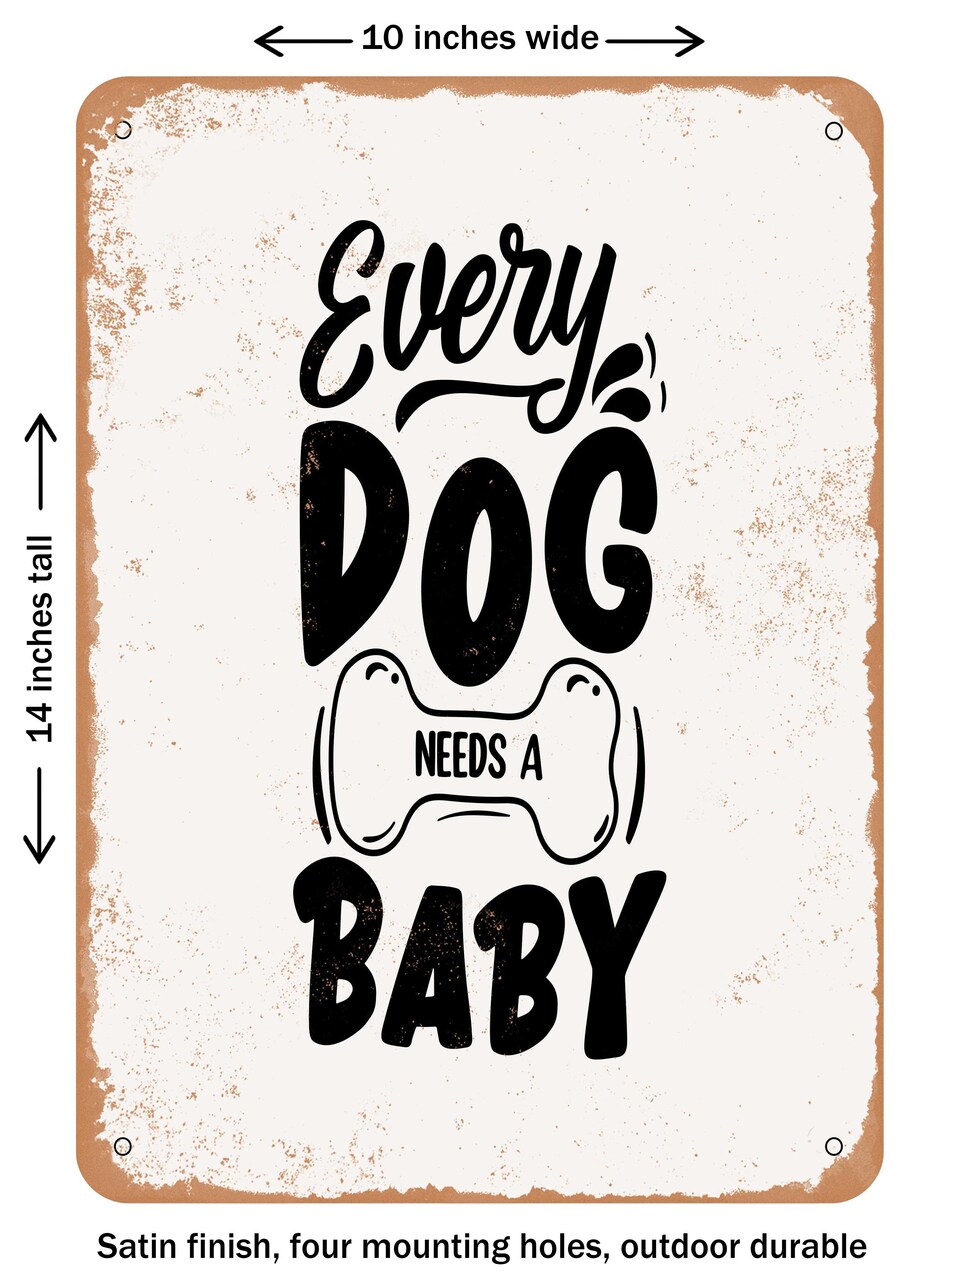 DECORATIVE METAL SIGN - Every Dog Needs a Baby - 7  - Vintage Rusty Look